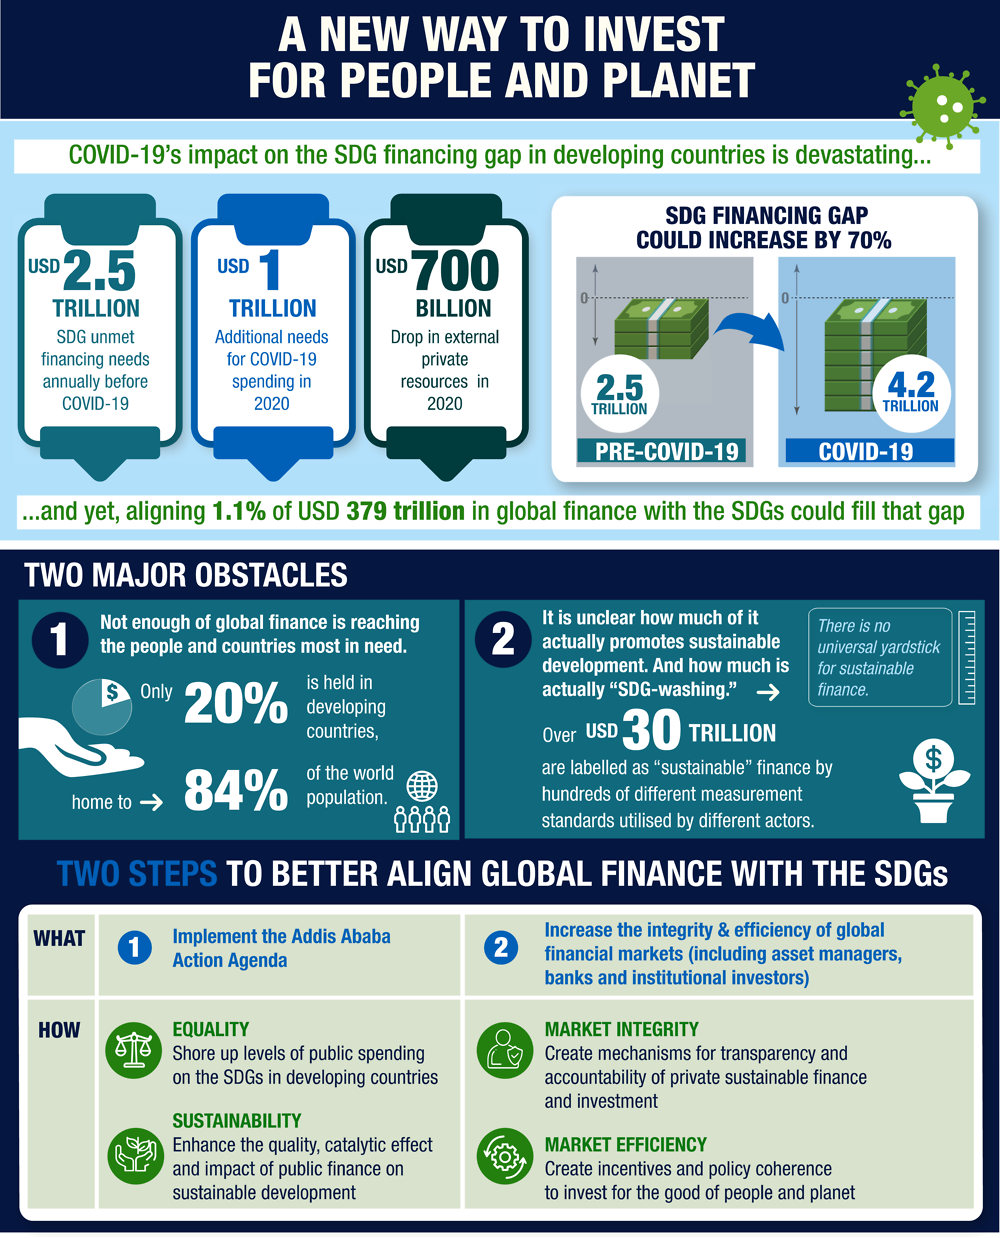 Infographic 1. Aligning global finance with the Sustainable Development Goals